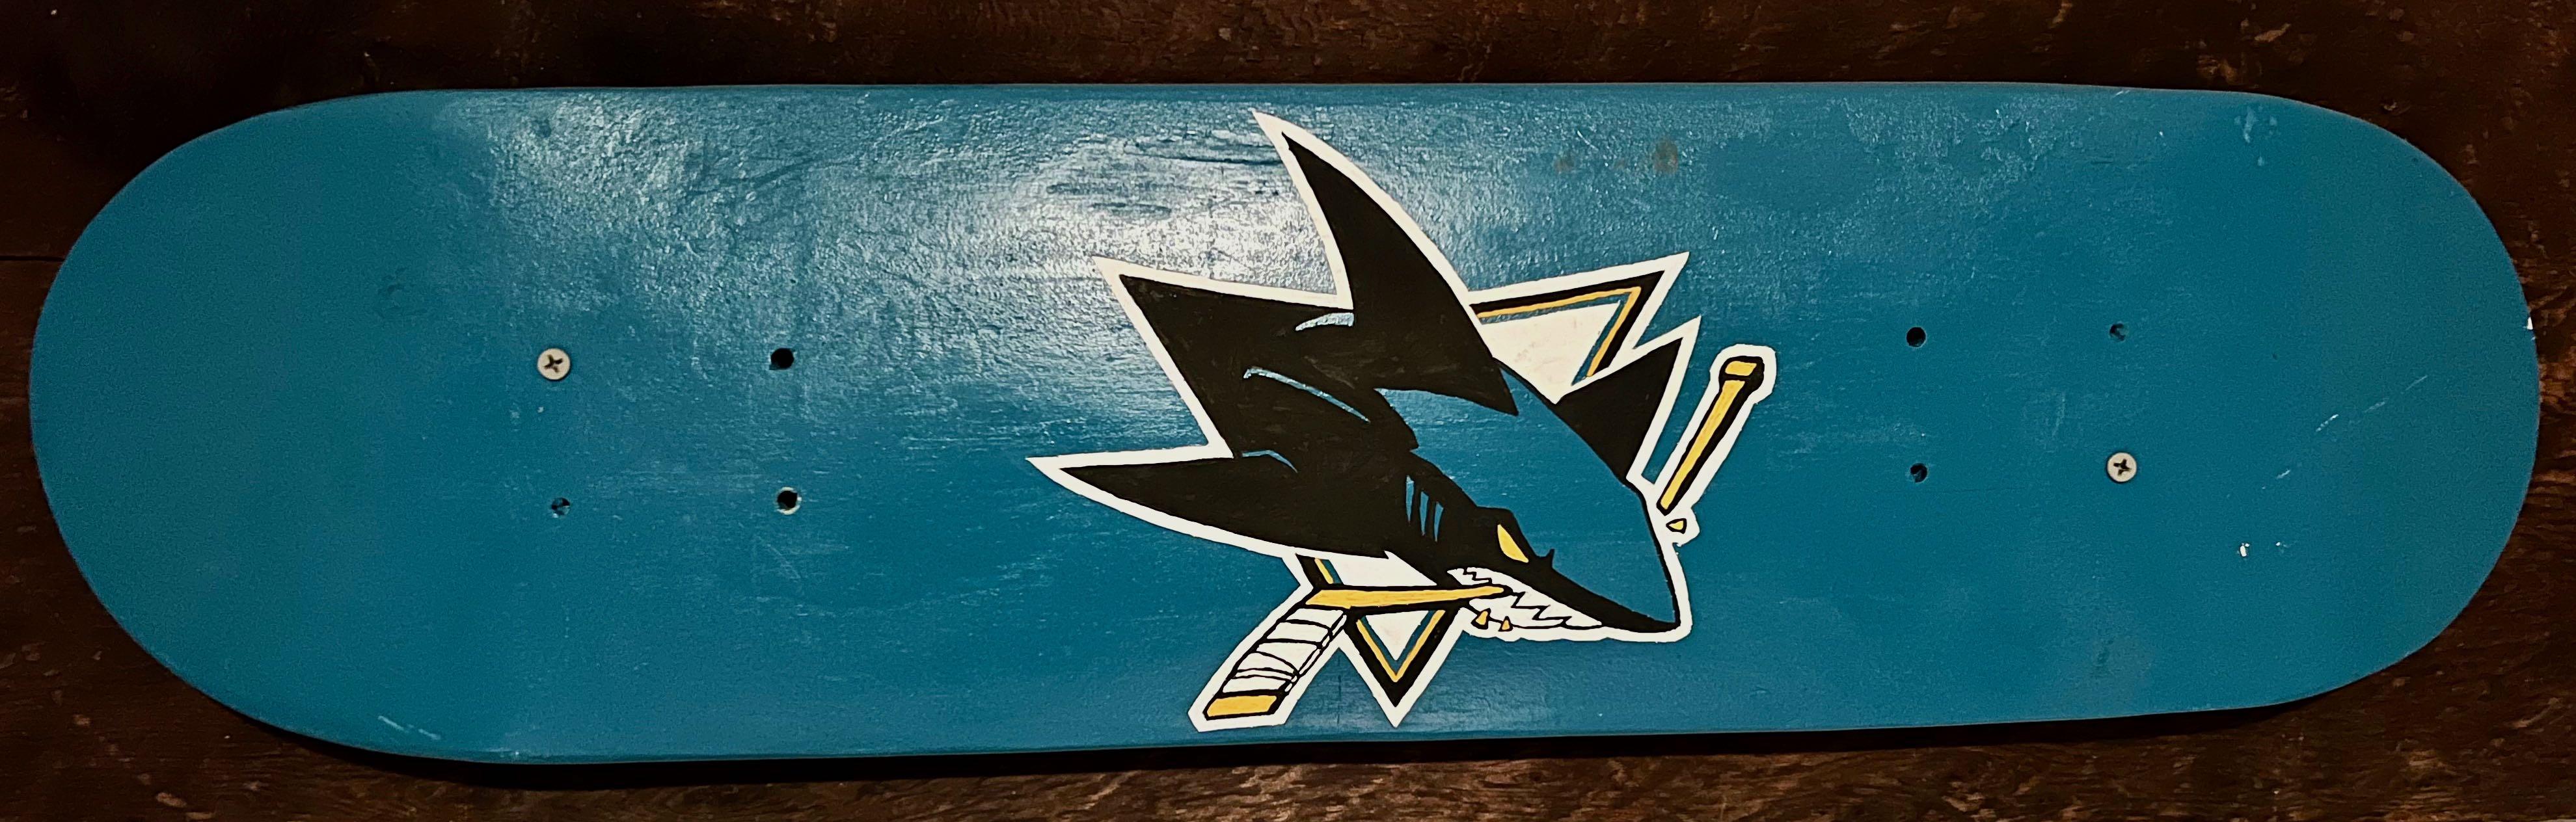 A photo of a mounted skateboard with the San Jose Sharks logo hand painted on it.